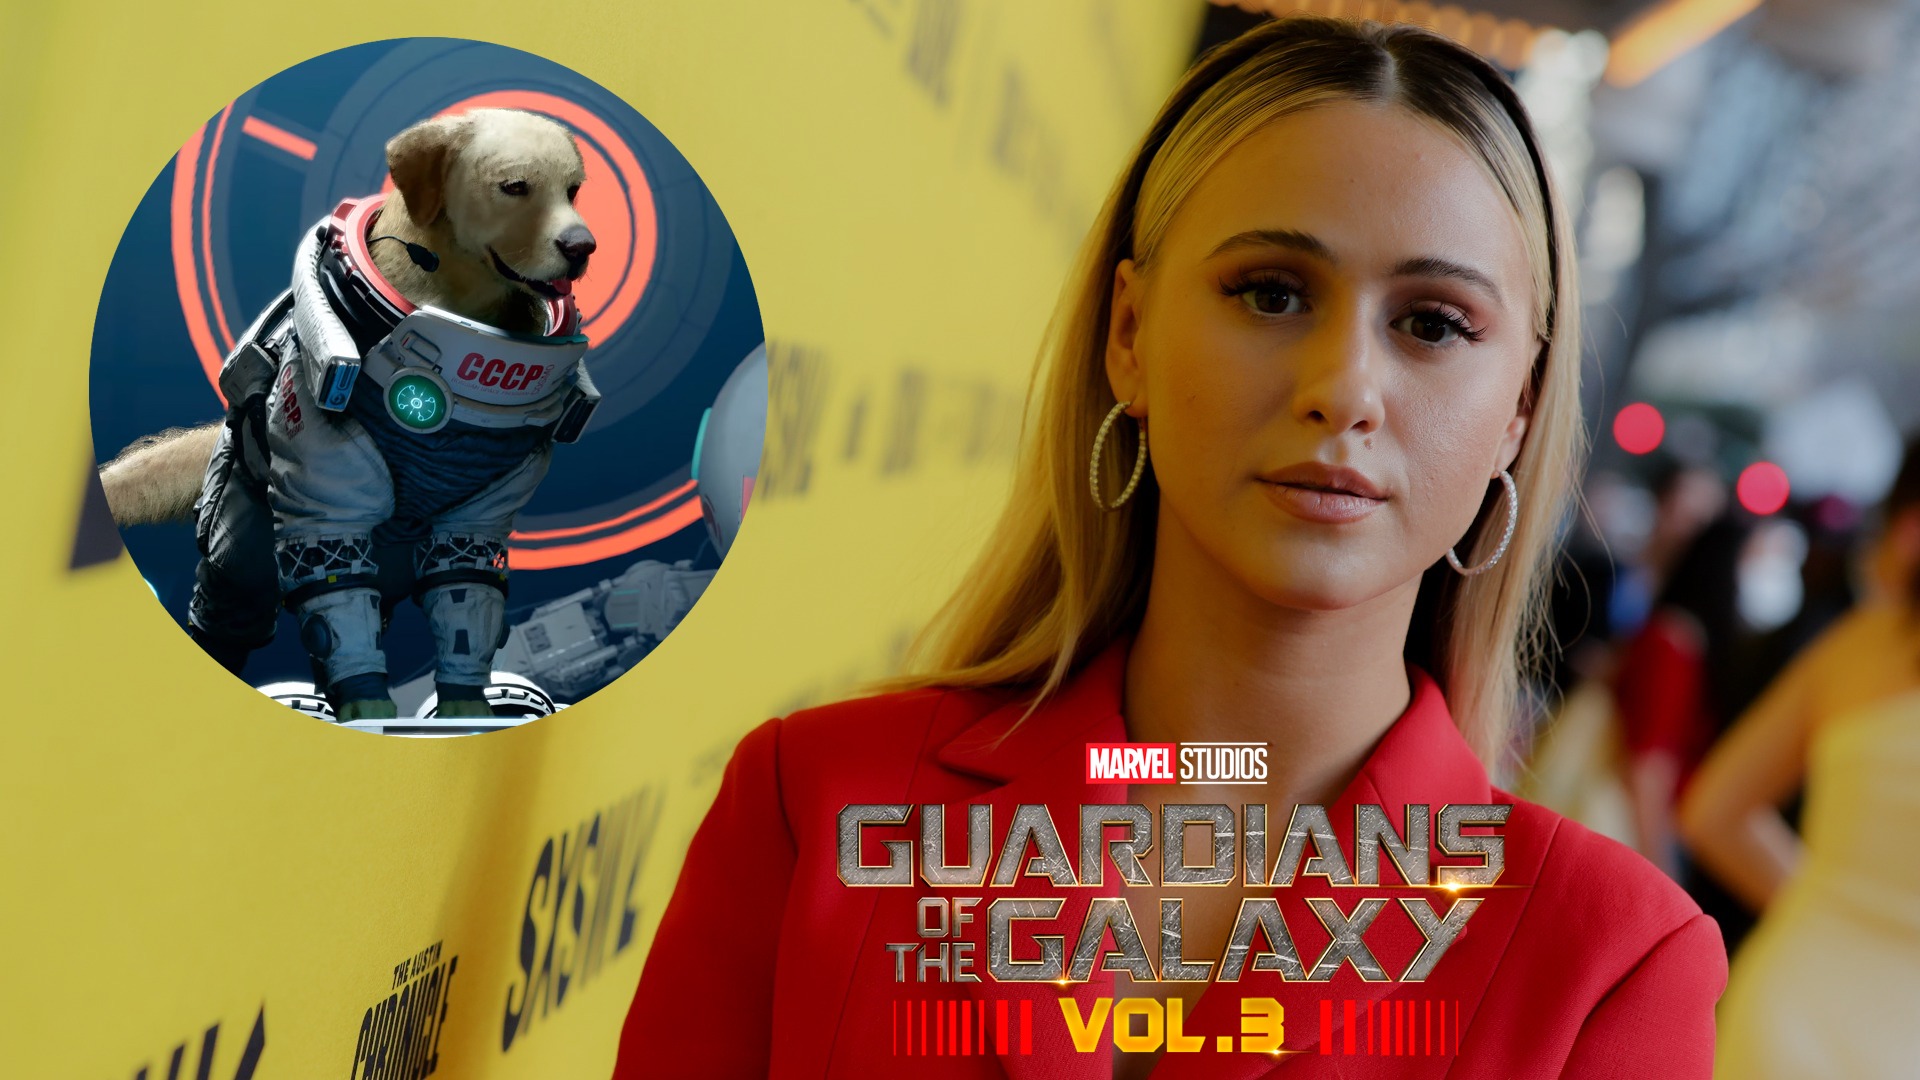 Maria Bakalova Will Voice Cosmo The Space Dog In ‘Guardians of the Galaxy Vol. 3’